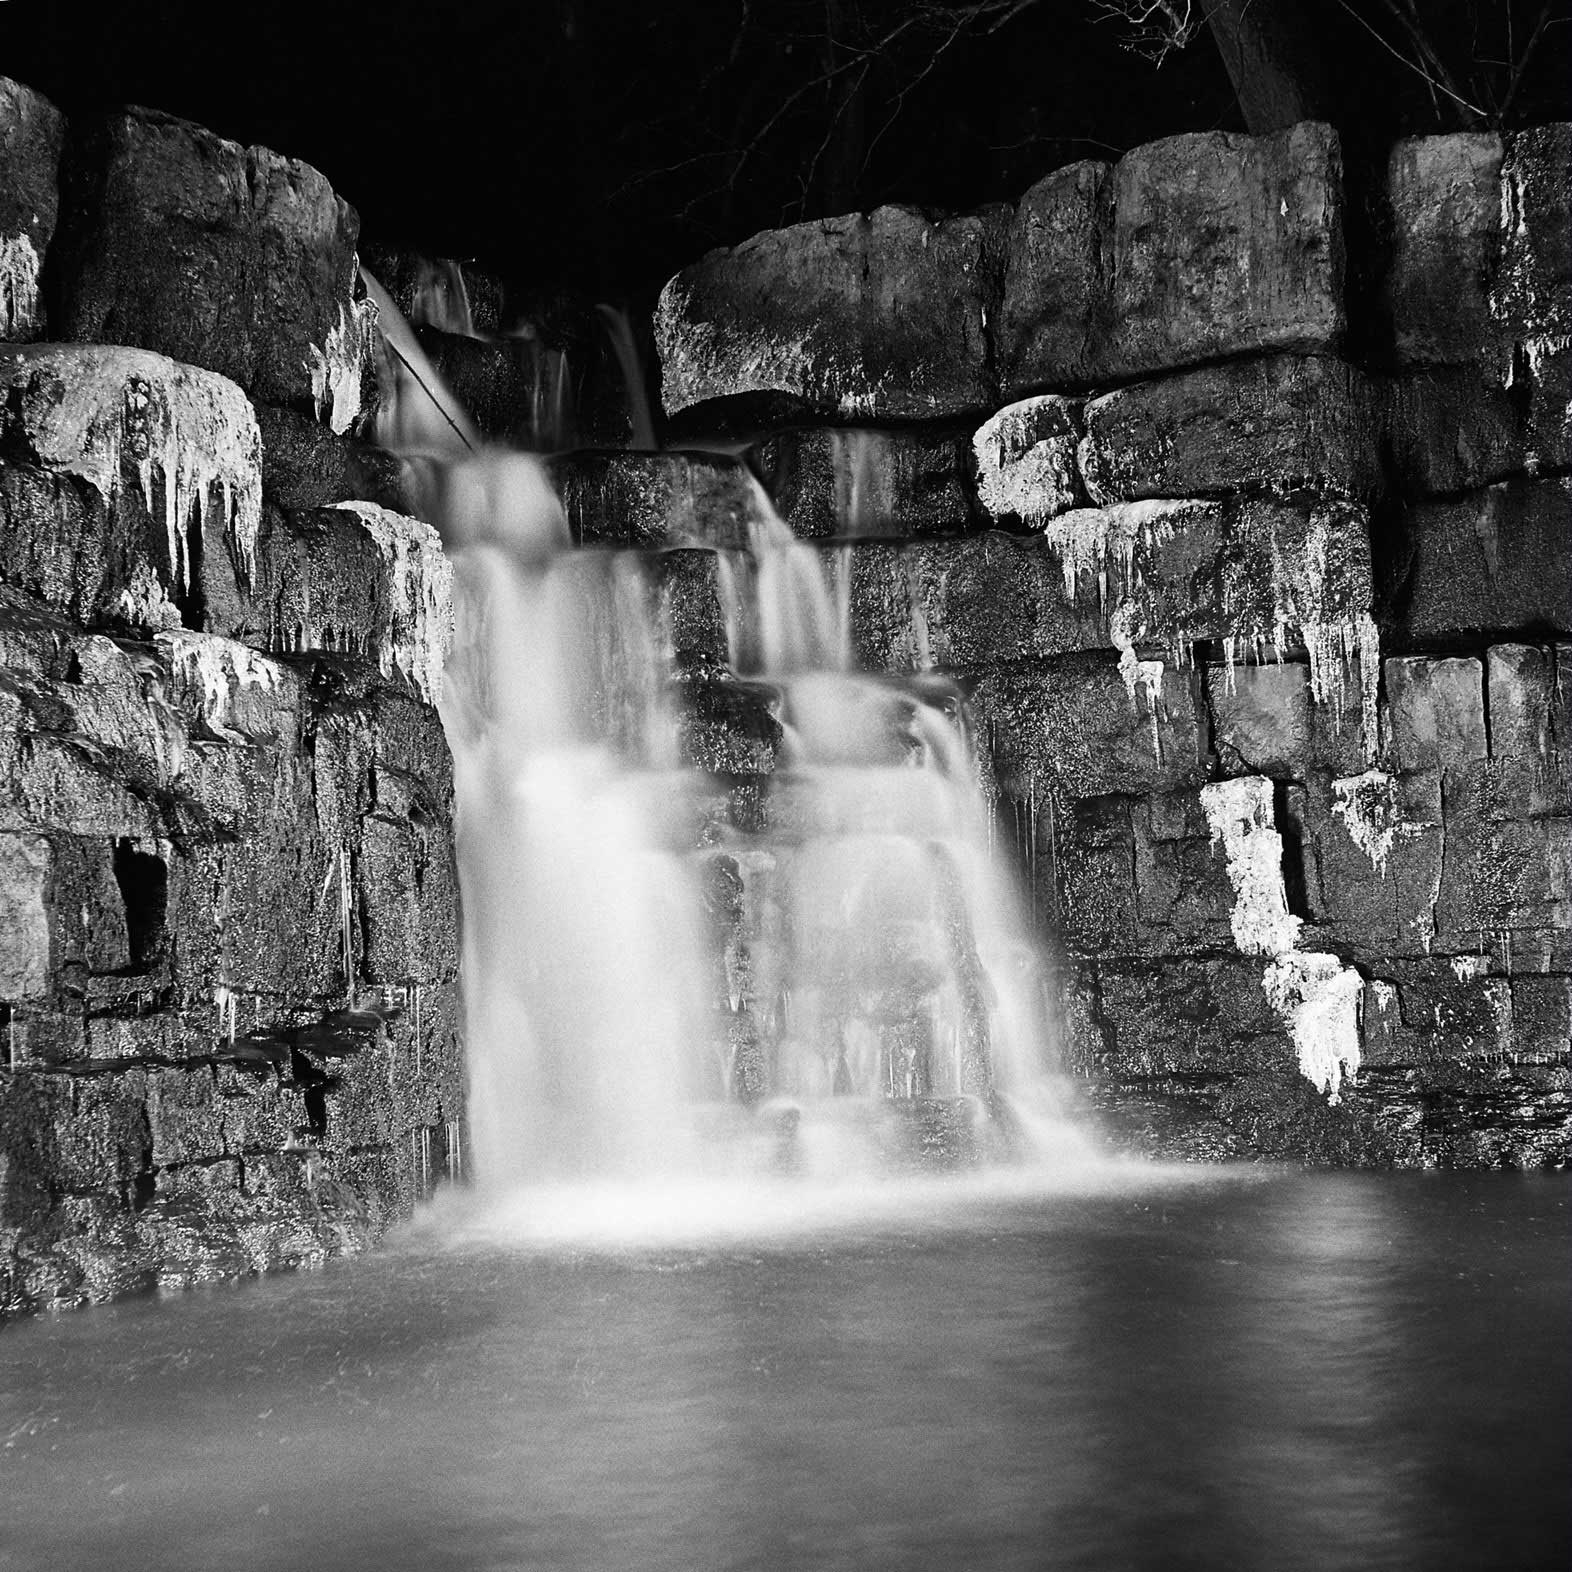 Nighttime - a black and white photograph of a waterfall by John Arnison.